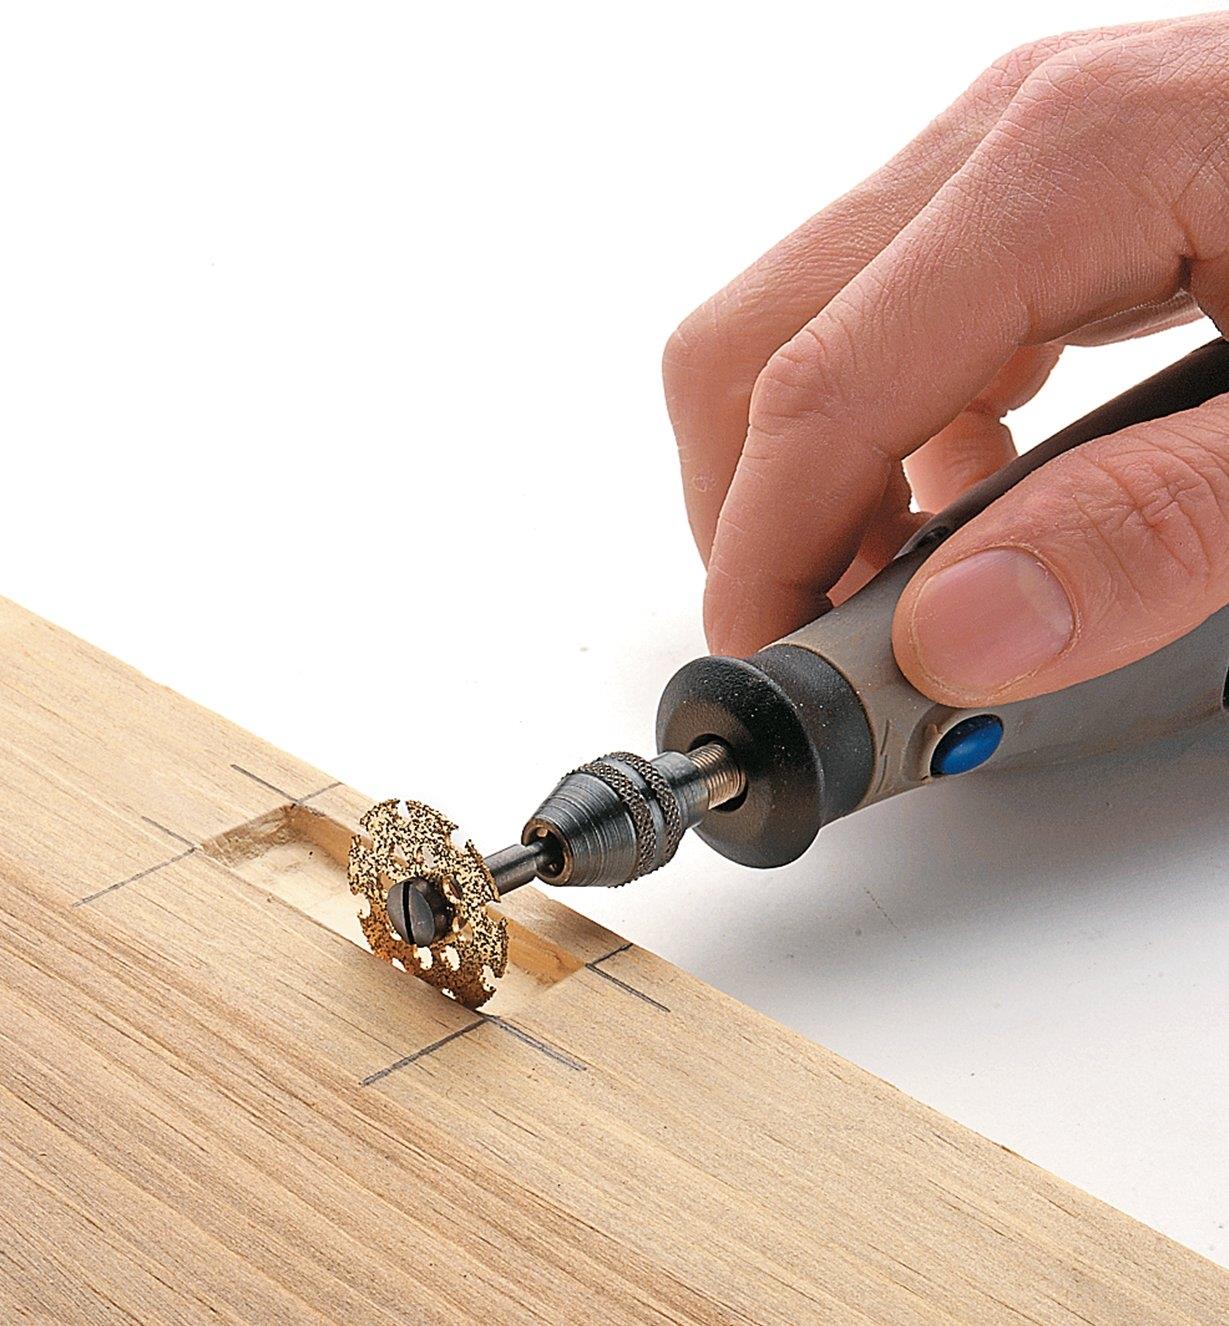 Using the #9 Cutting Wheel to cut out a mortise